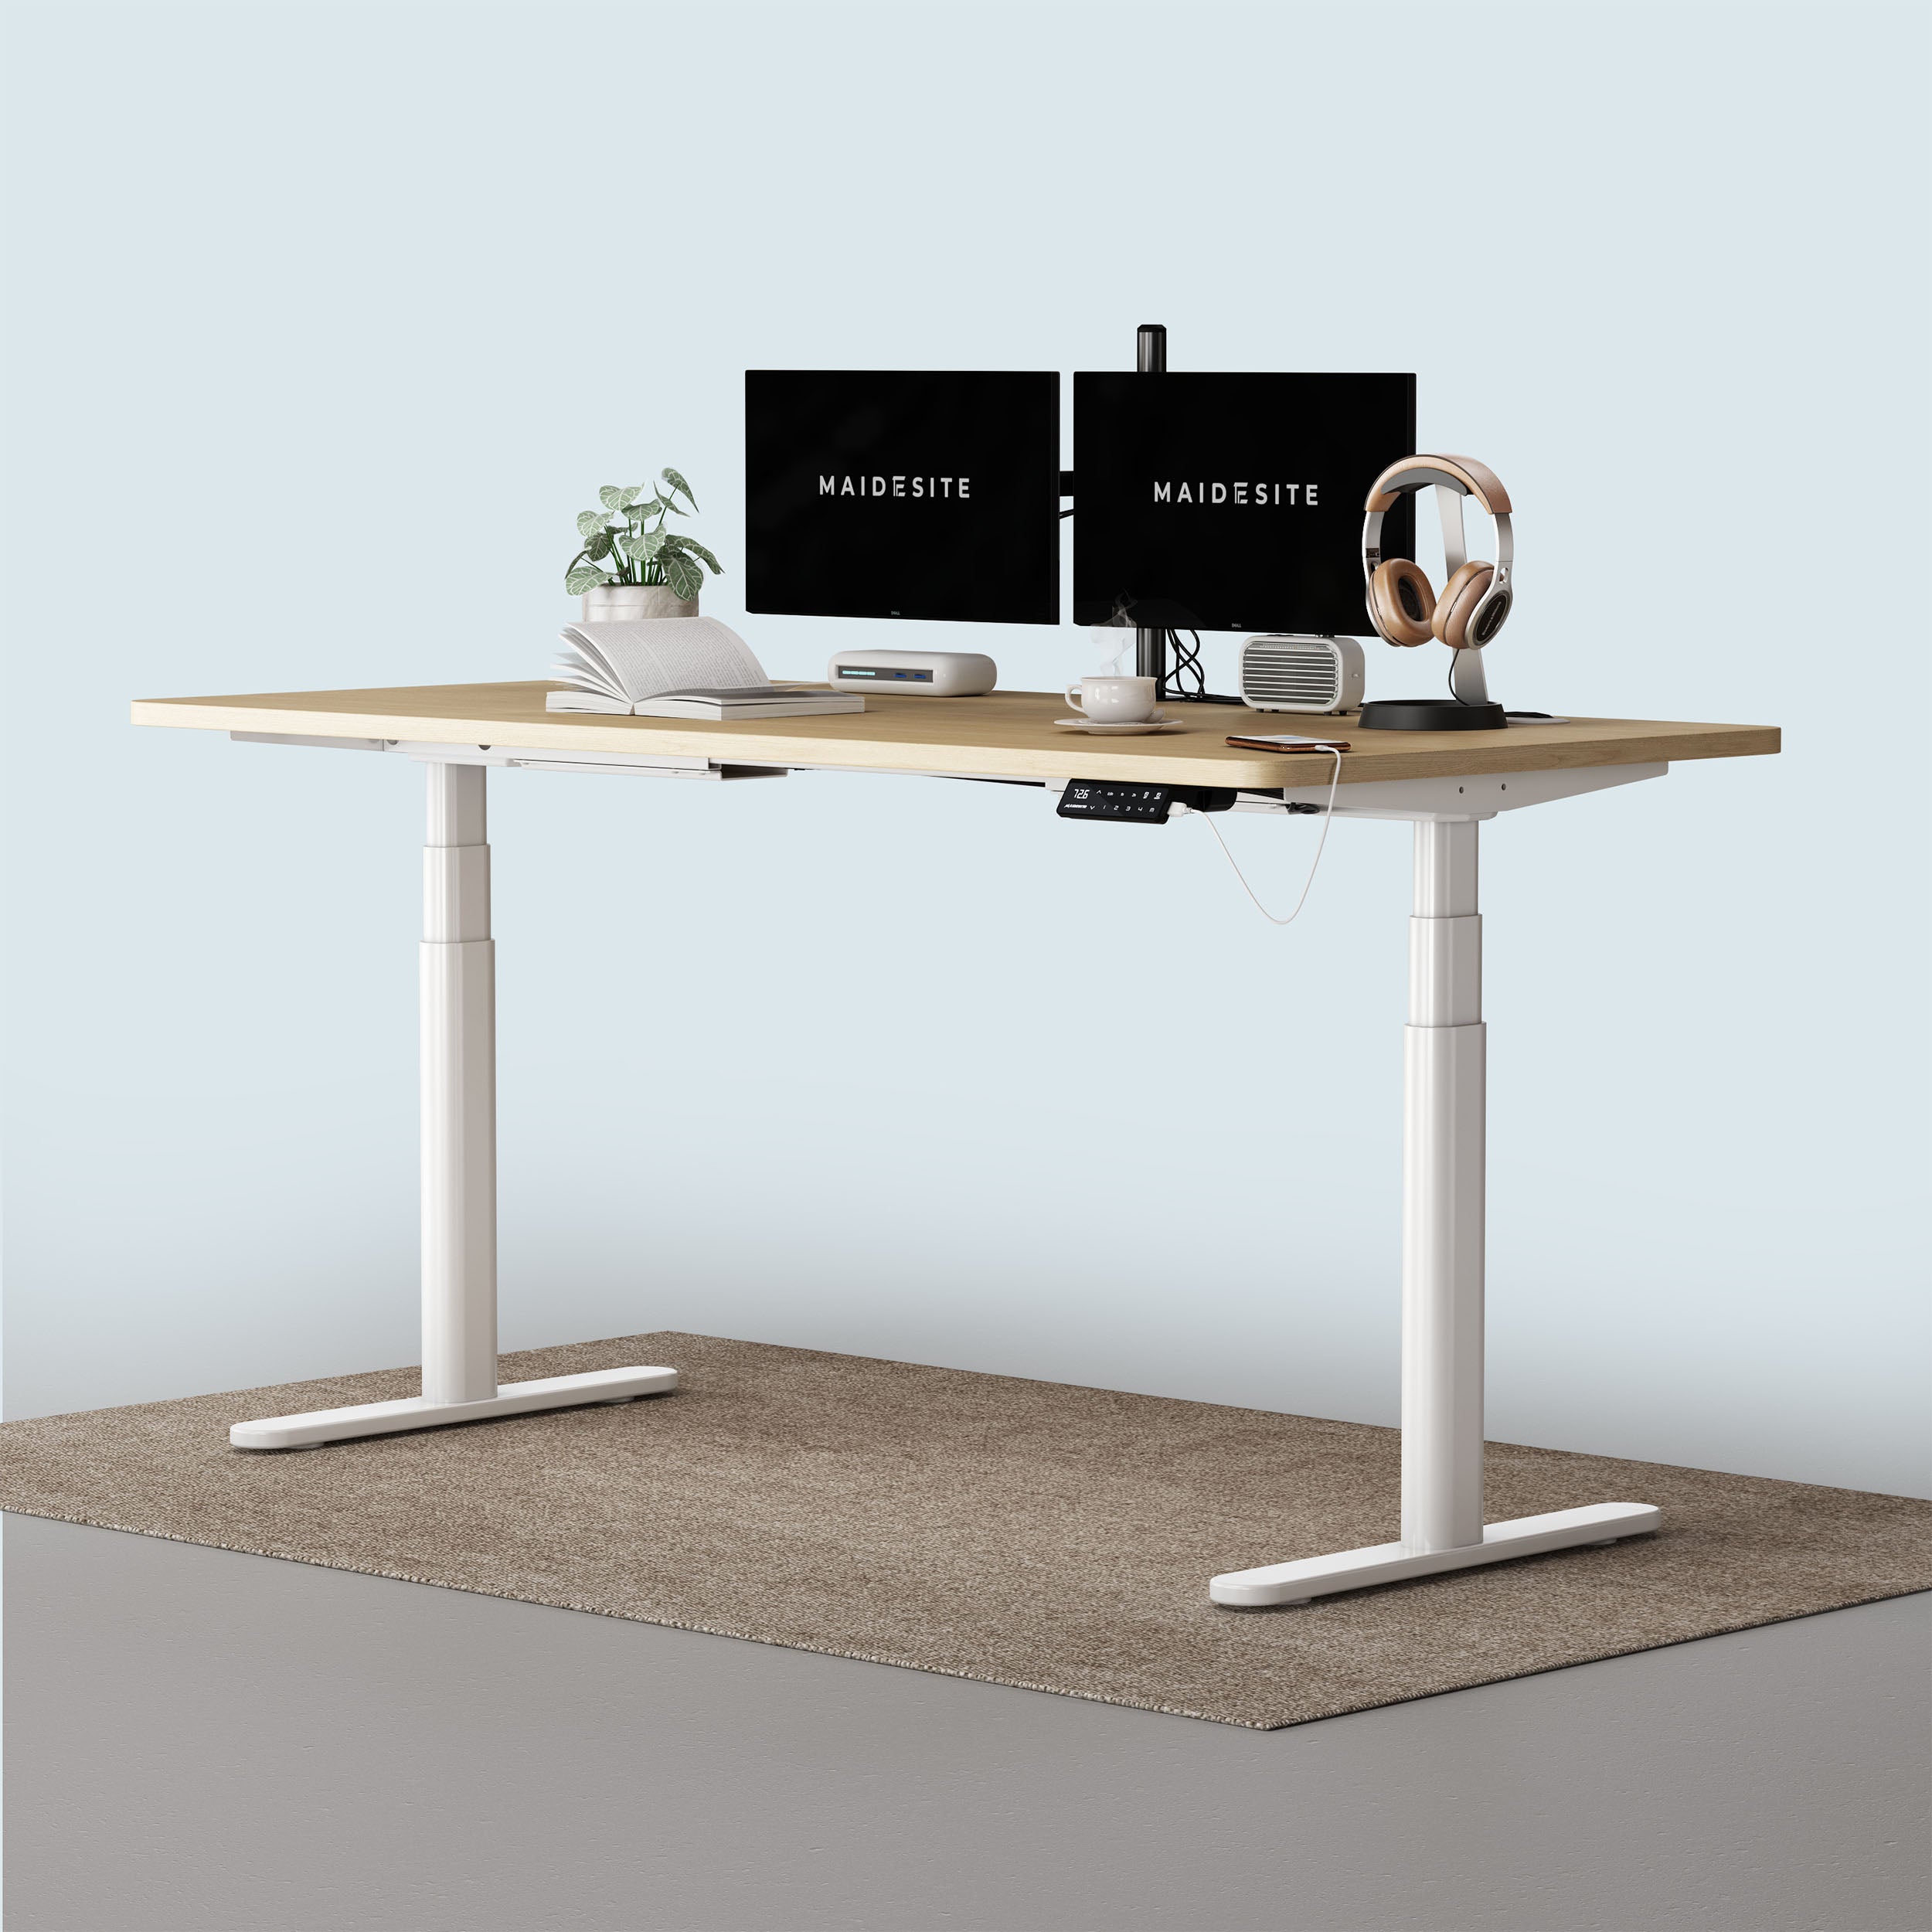 Maidesite TH2 Pro Plus white oval standing desk with oak top  in the office